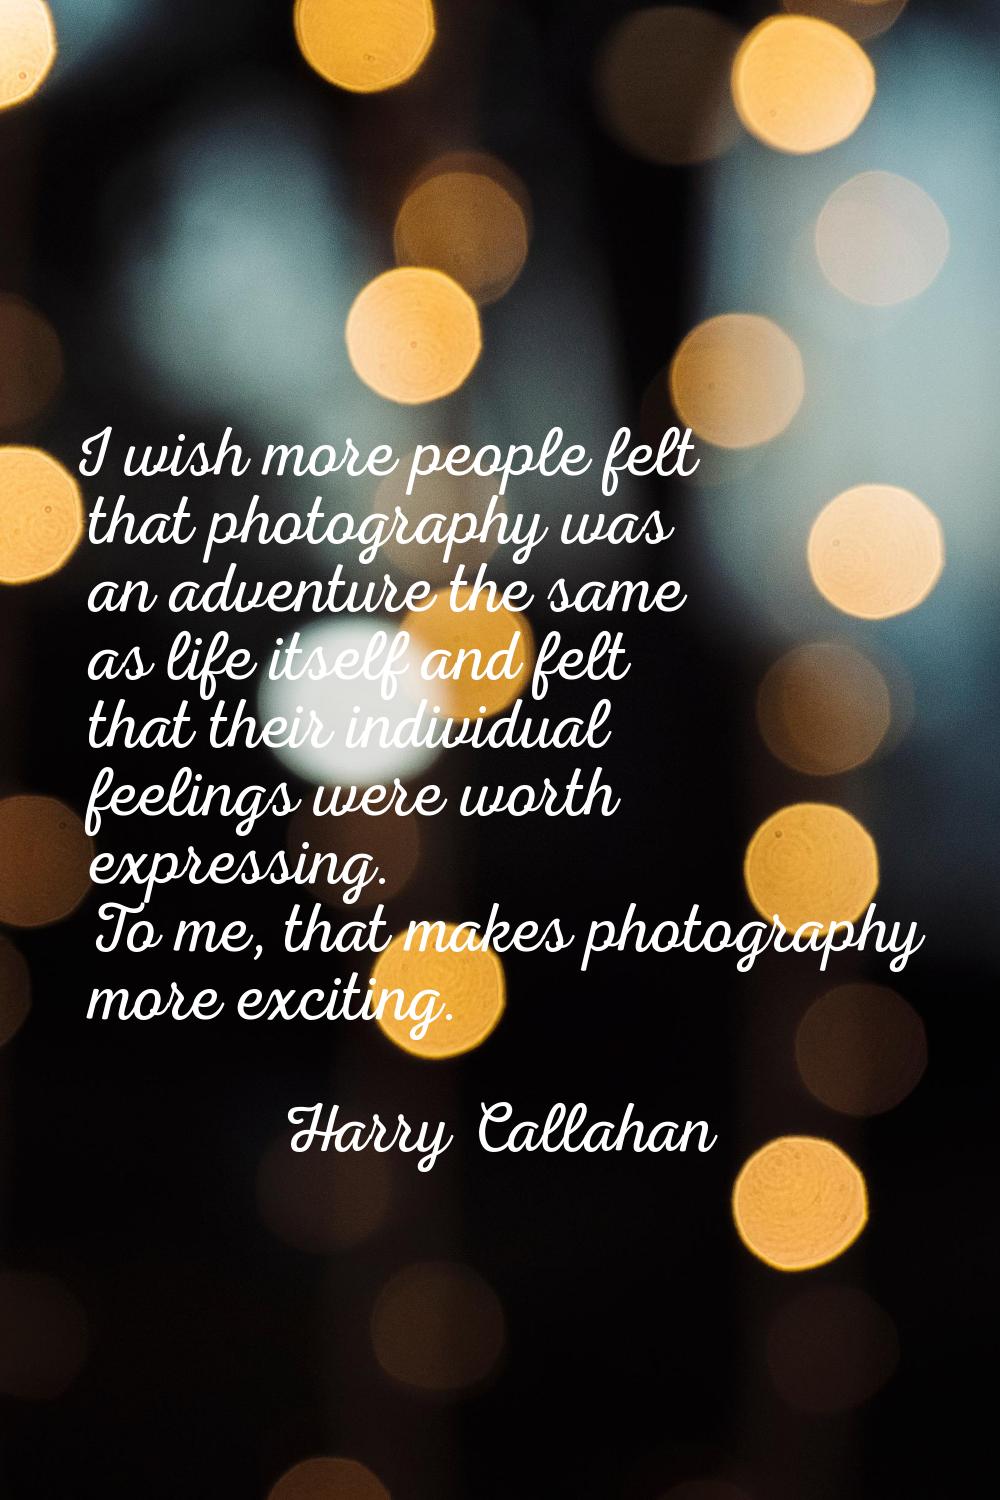 I wish more people felt that photography was an adventure the same as life itself and felt that the